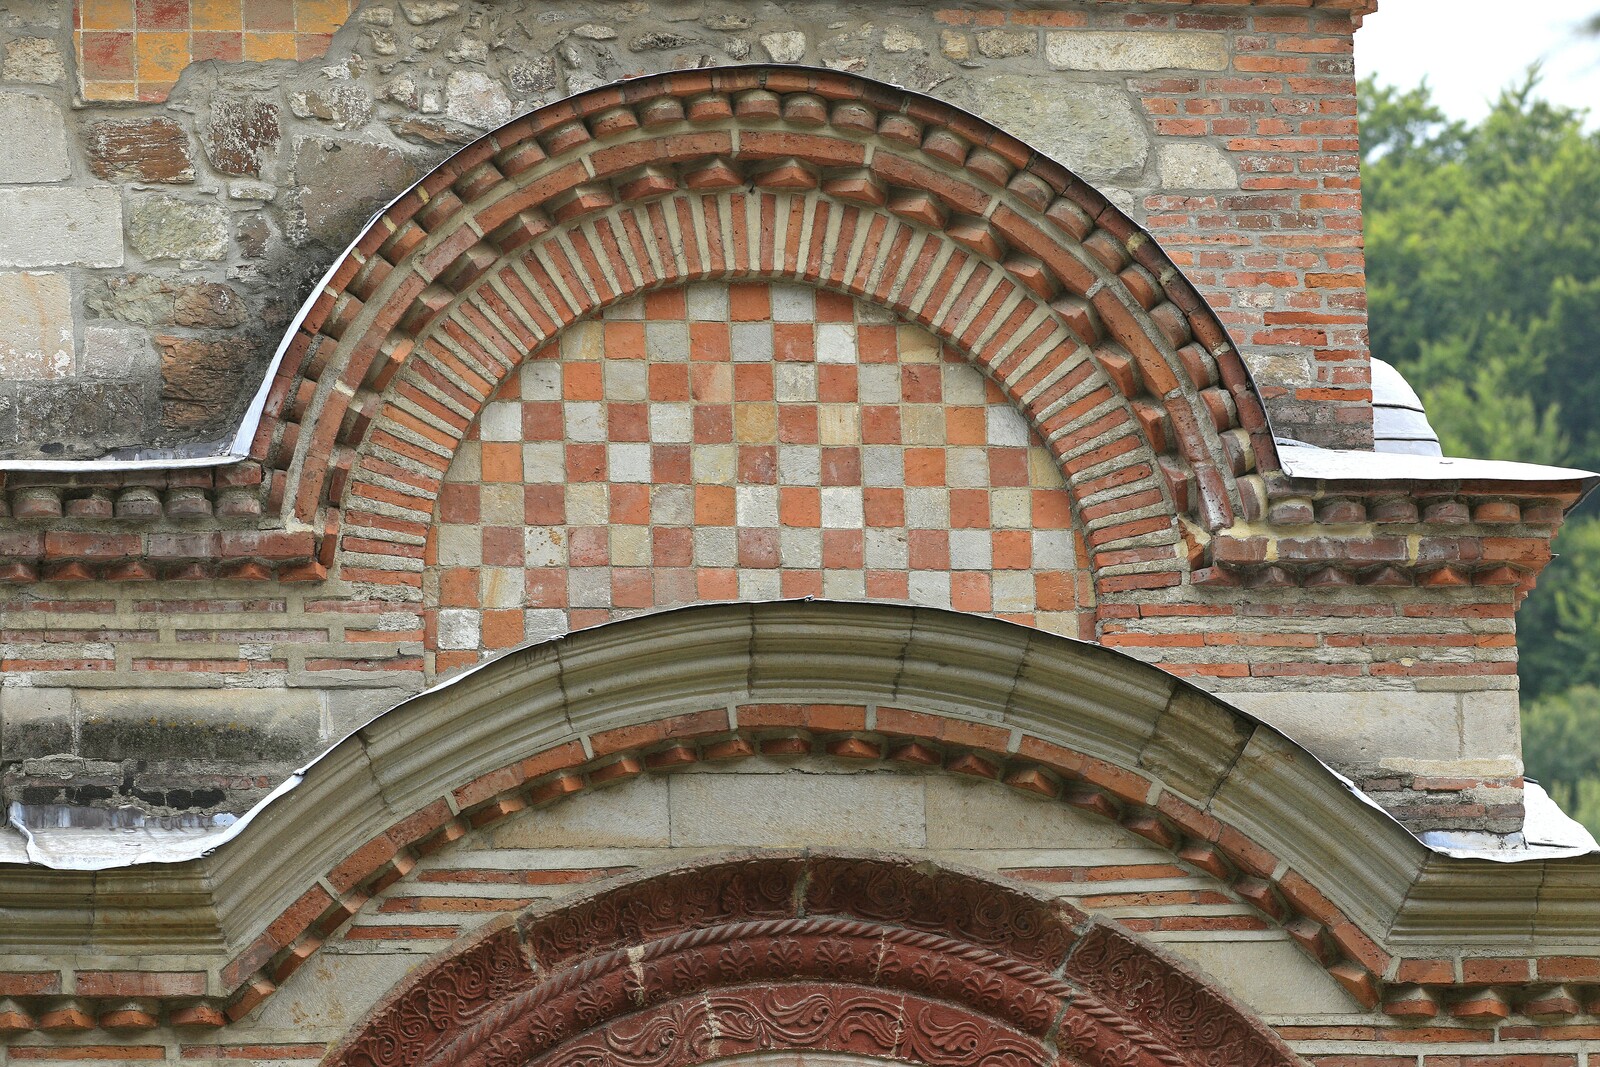 Tympanum with Chessboard Motif